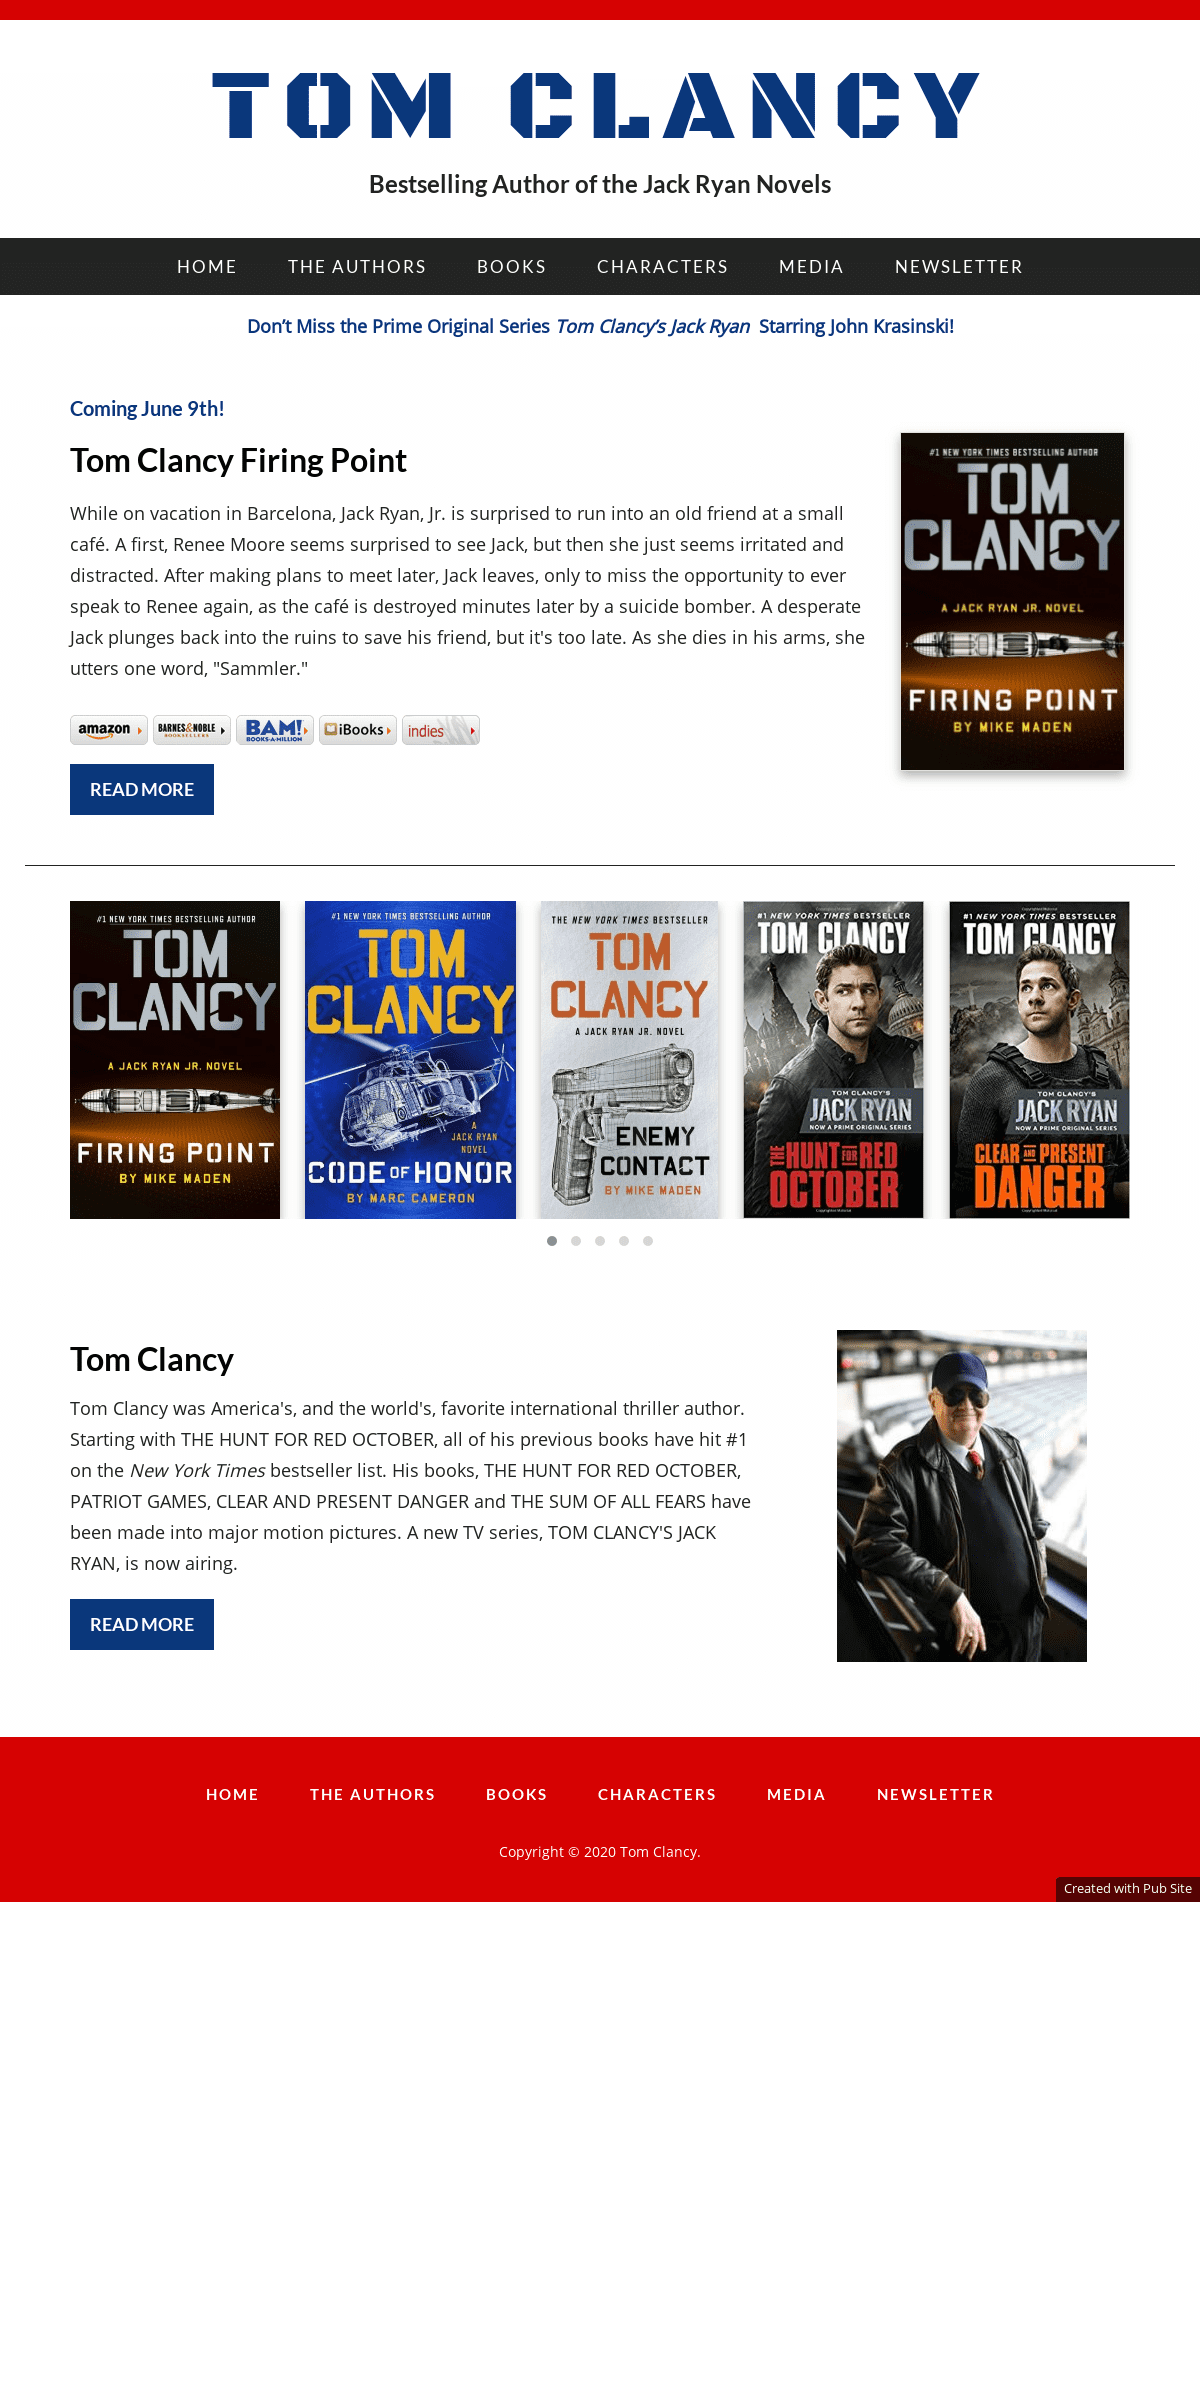 A complete backup of tomclancy.com